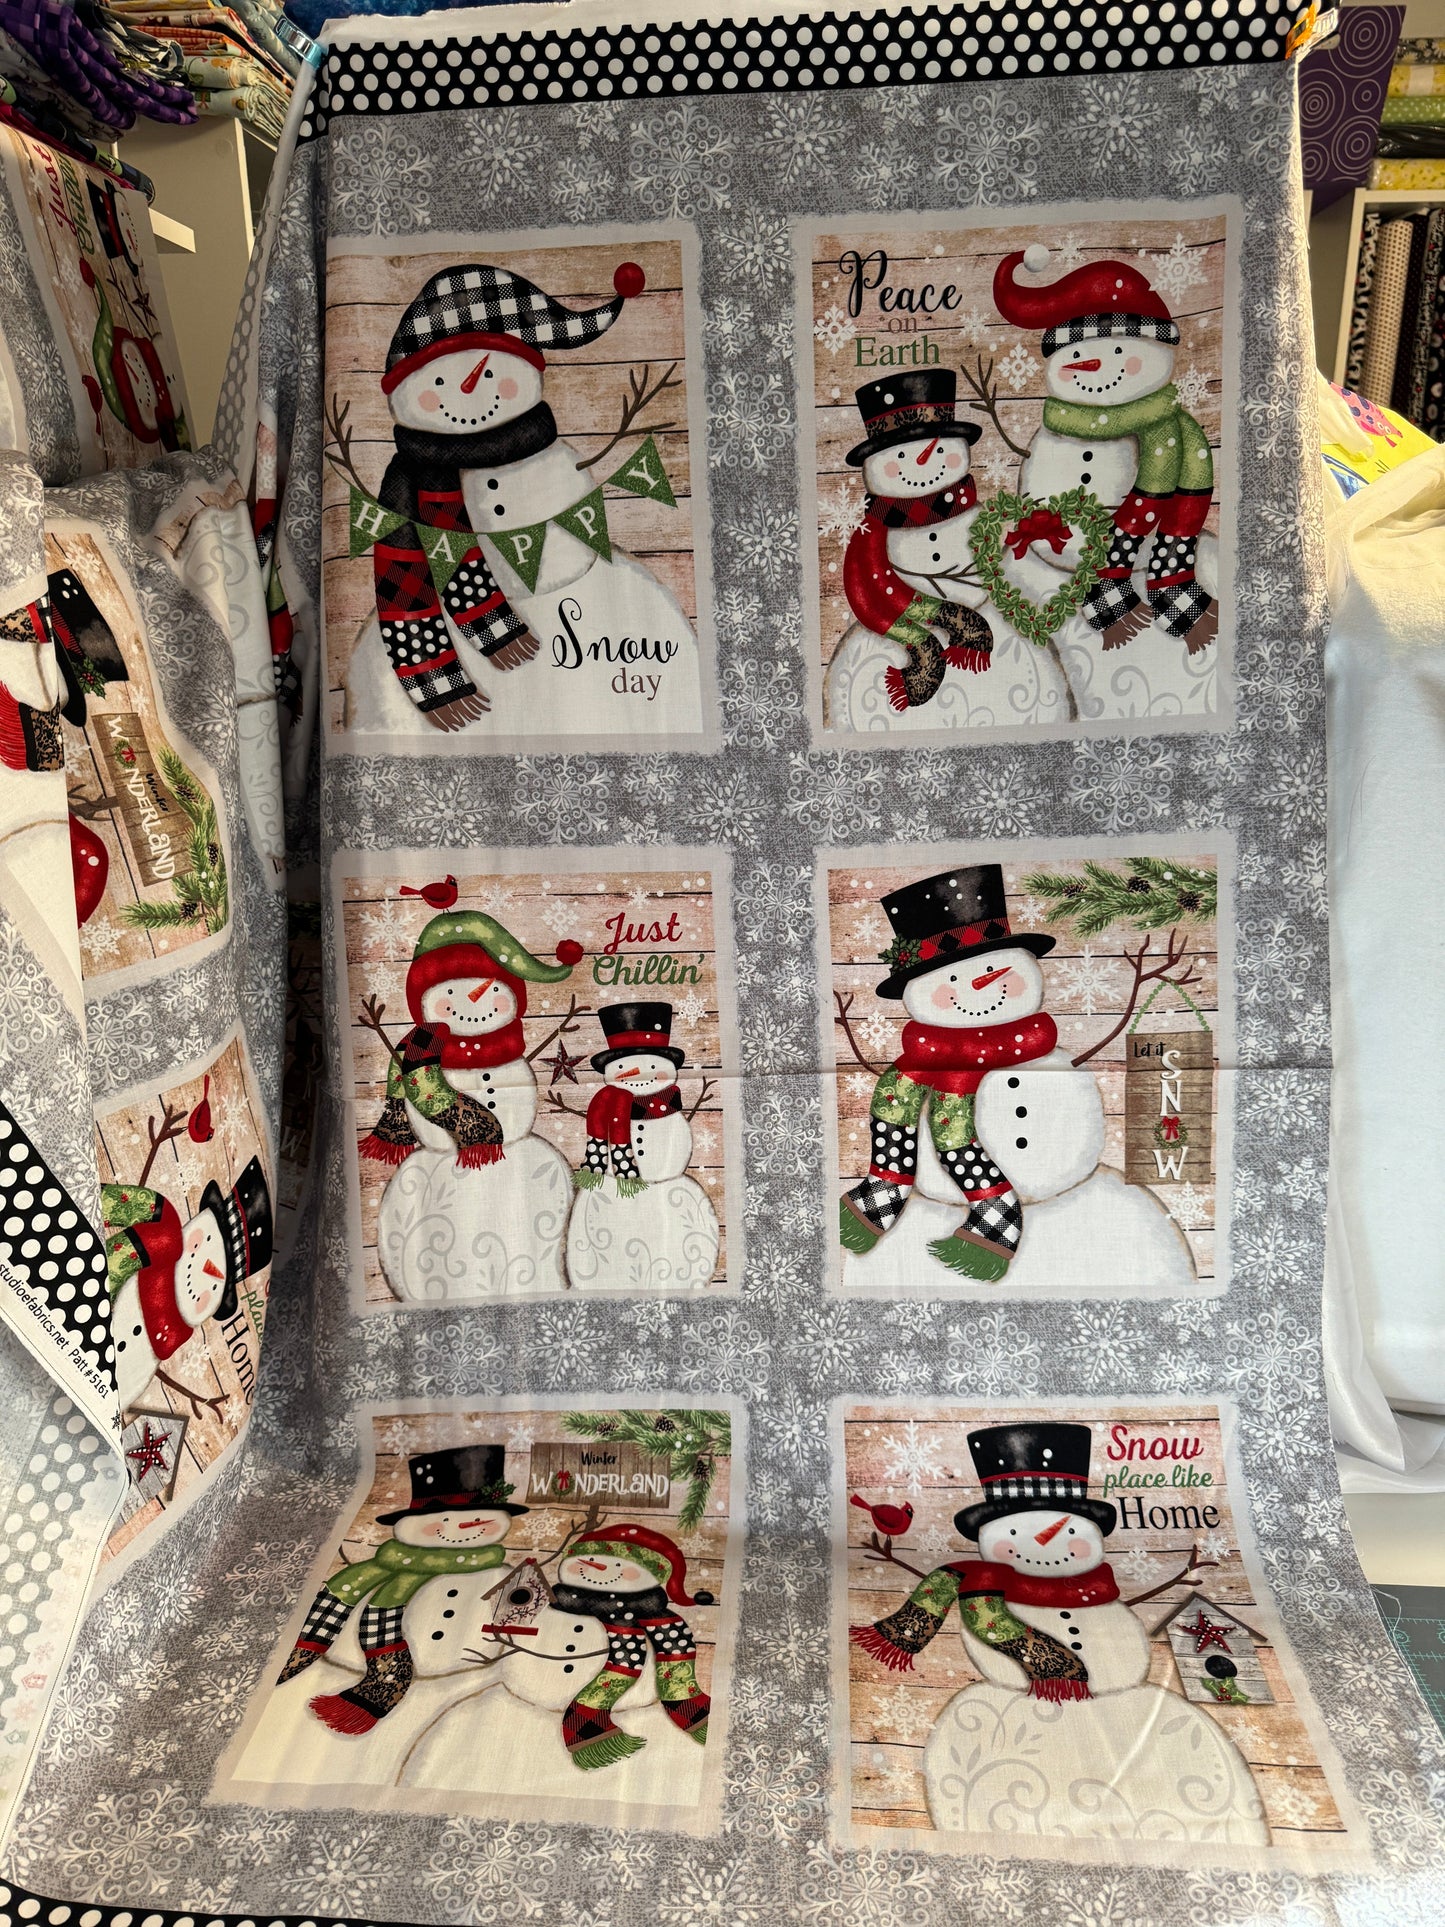 Studio E Fabric Snow Place Like Home Studio E Snowman Fabric by the yard or Snowman panel choices